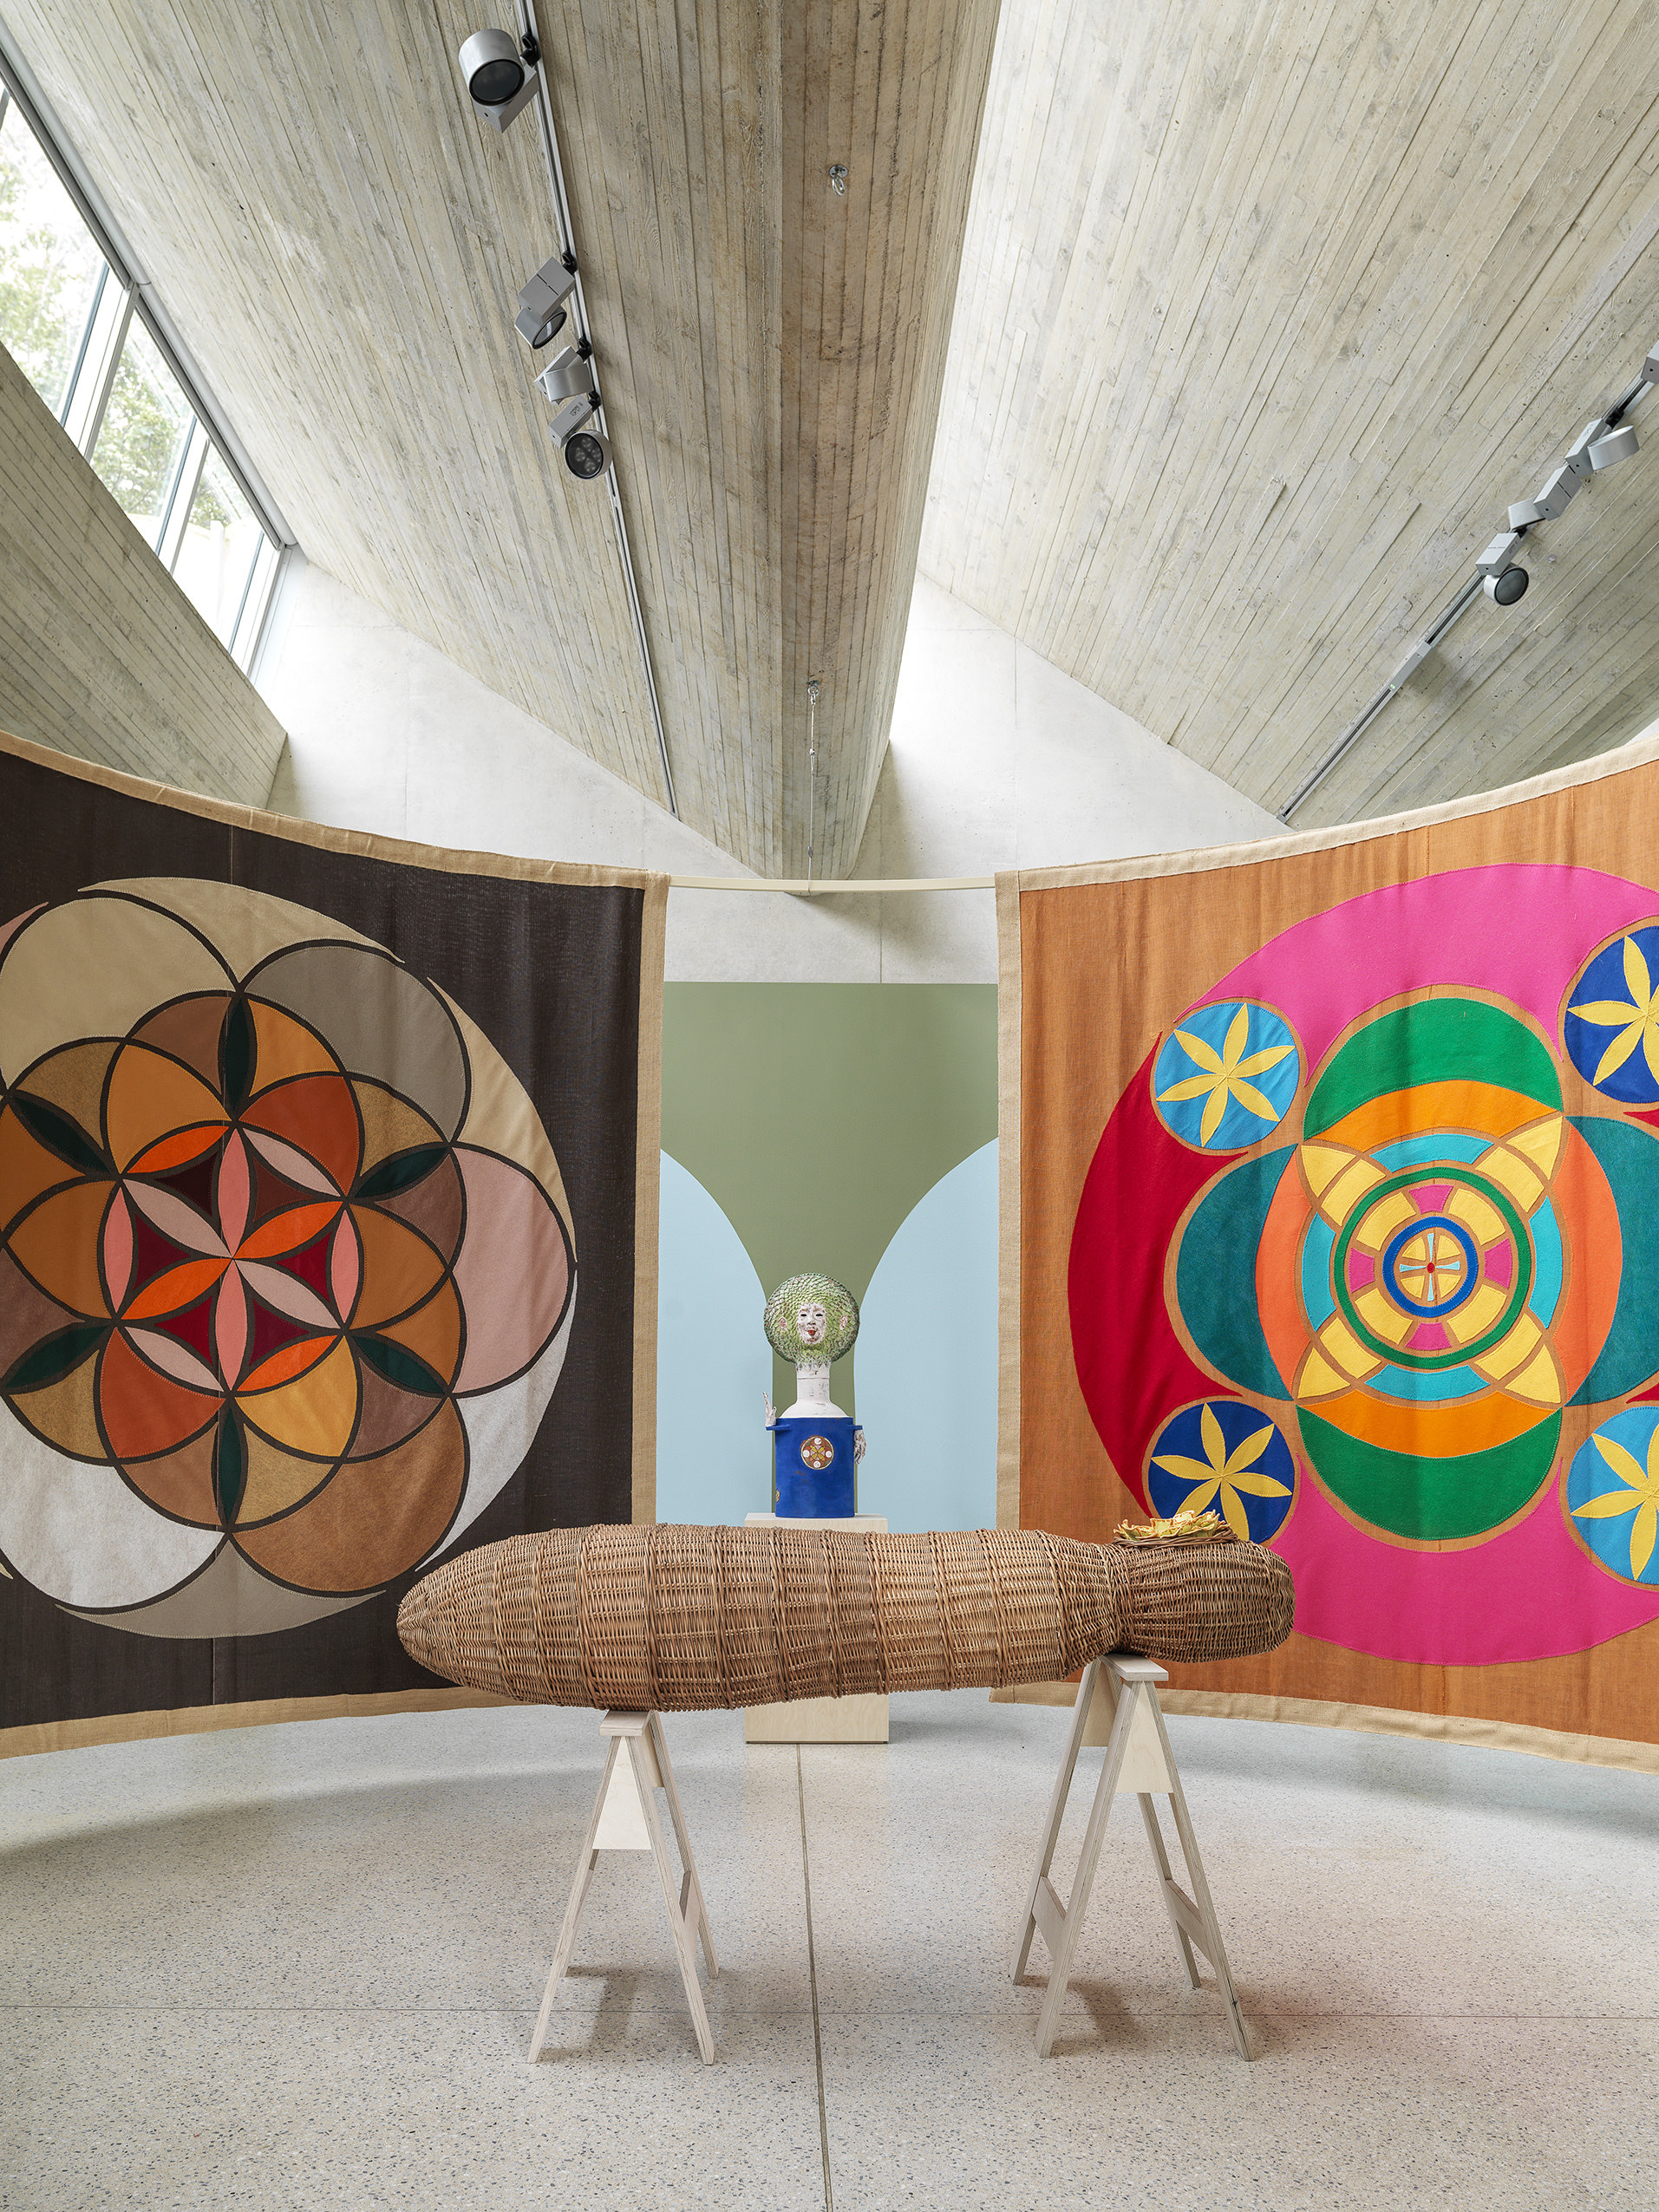 Indoor gallery space with two hanging tapestries and a woven basket coffin